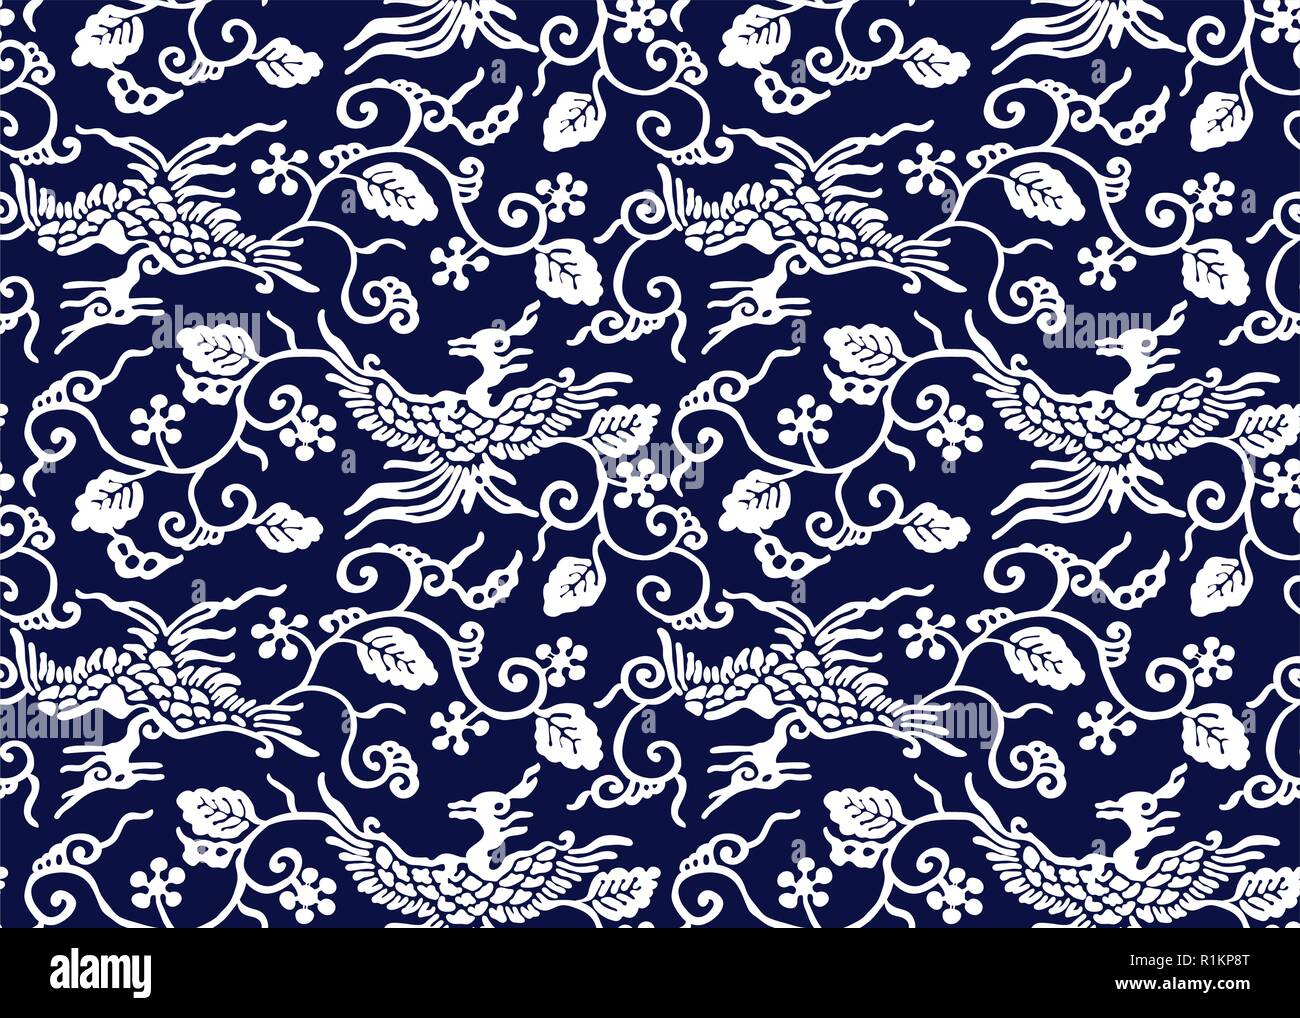 Seamless indigo dye stencil pattern, Japanese traditional motif with birds and vines. White on navy blue background. Stock Vector